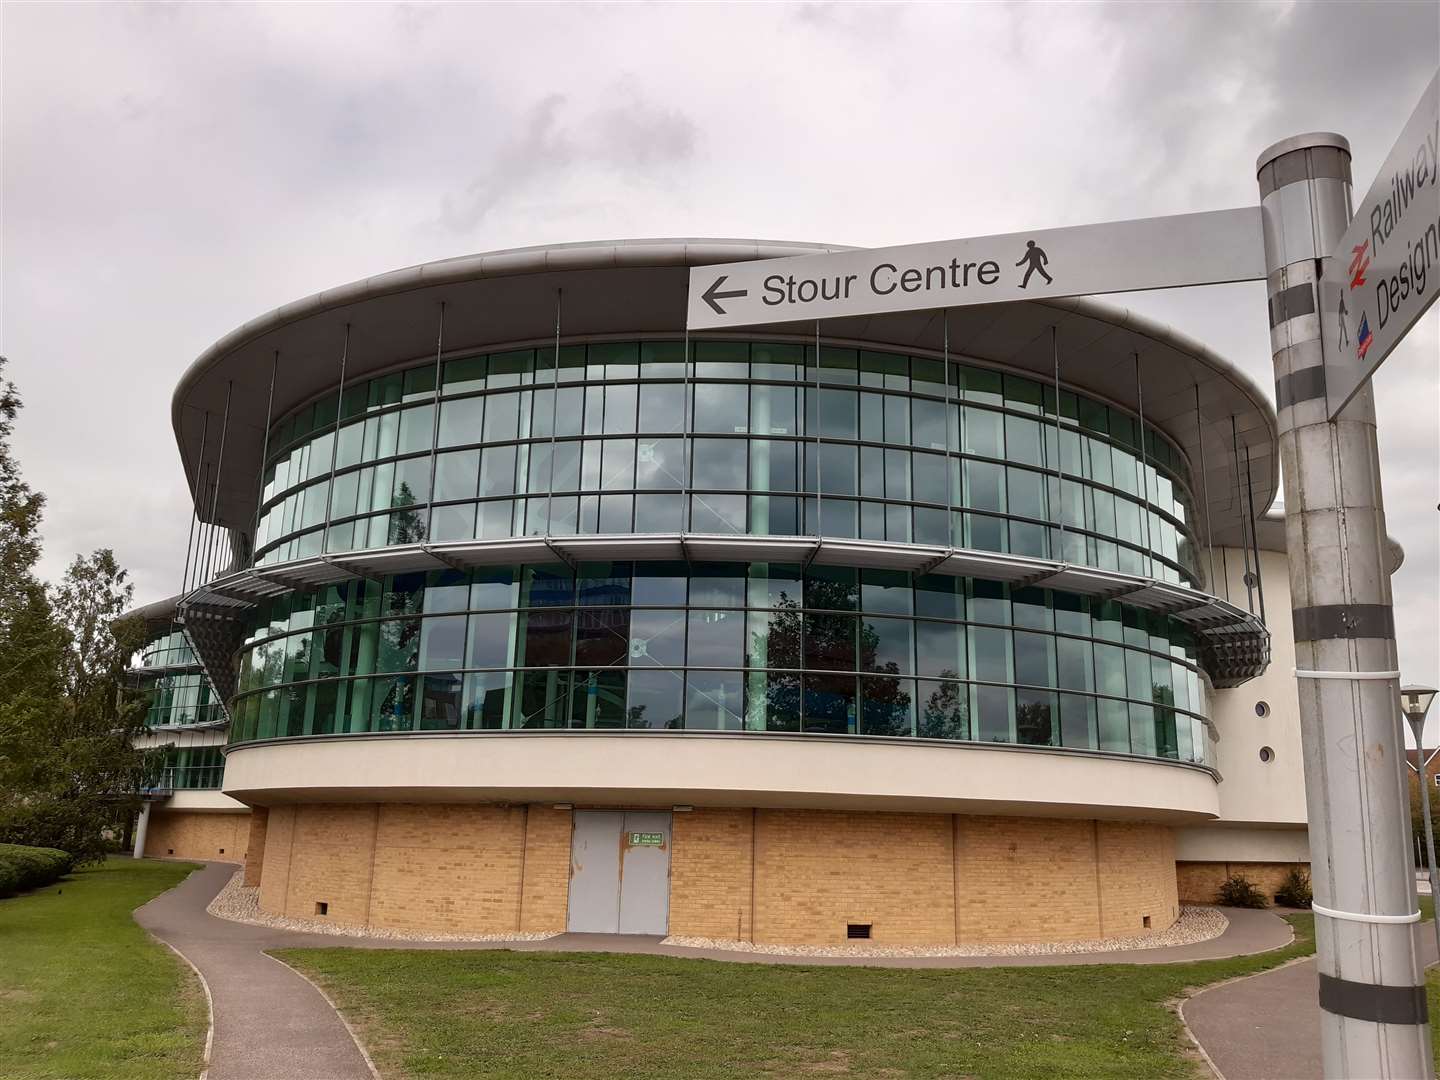 Ashford's Stour Centre will finally have a pool available to the public, but its leisure pools will remain closed for now